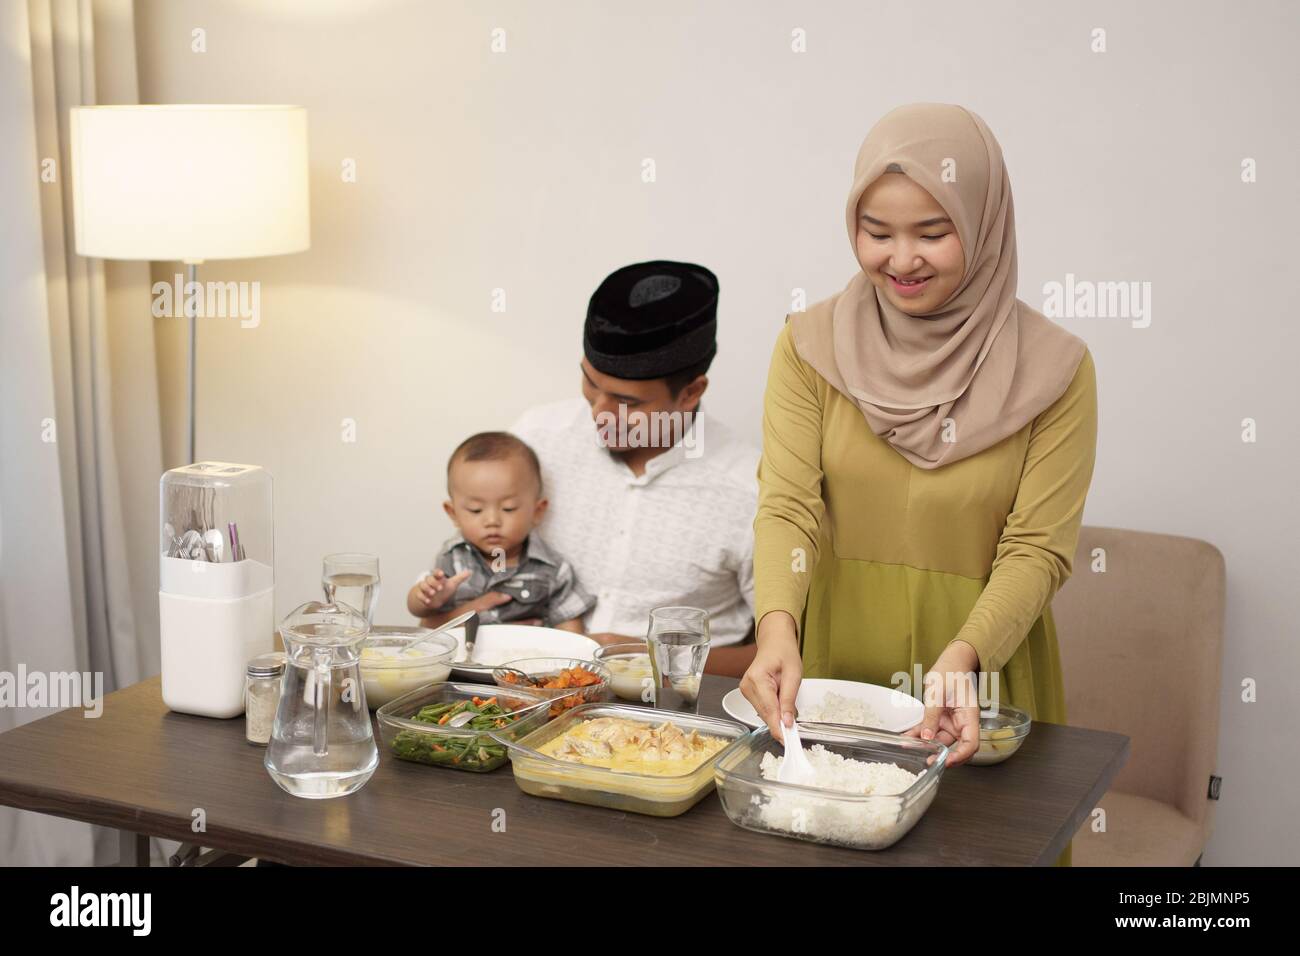 muslim family with toddler breakfasting during ramadan kareem at home together Stock Photo